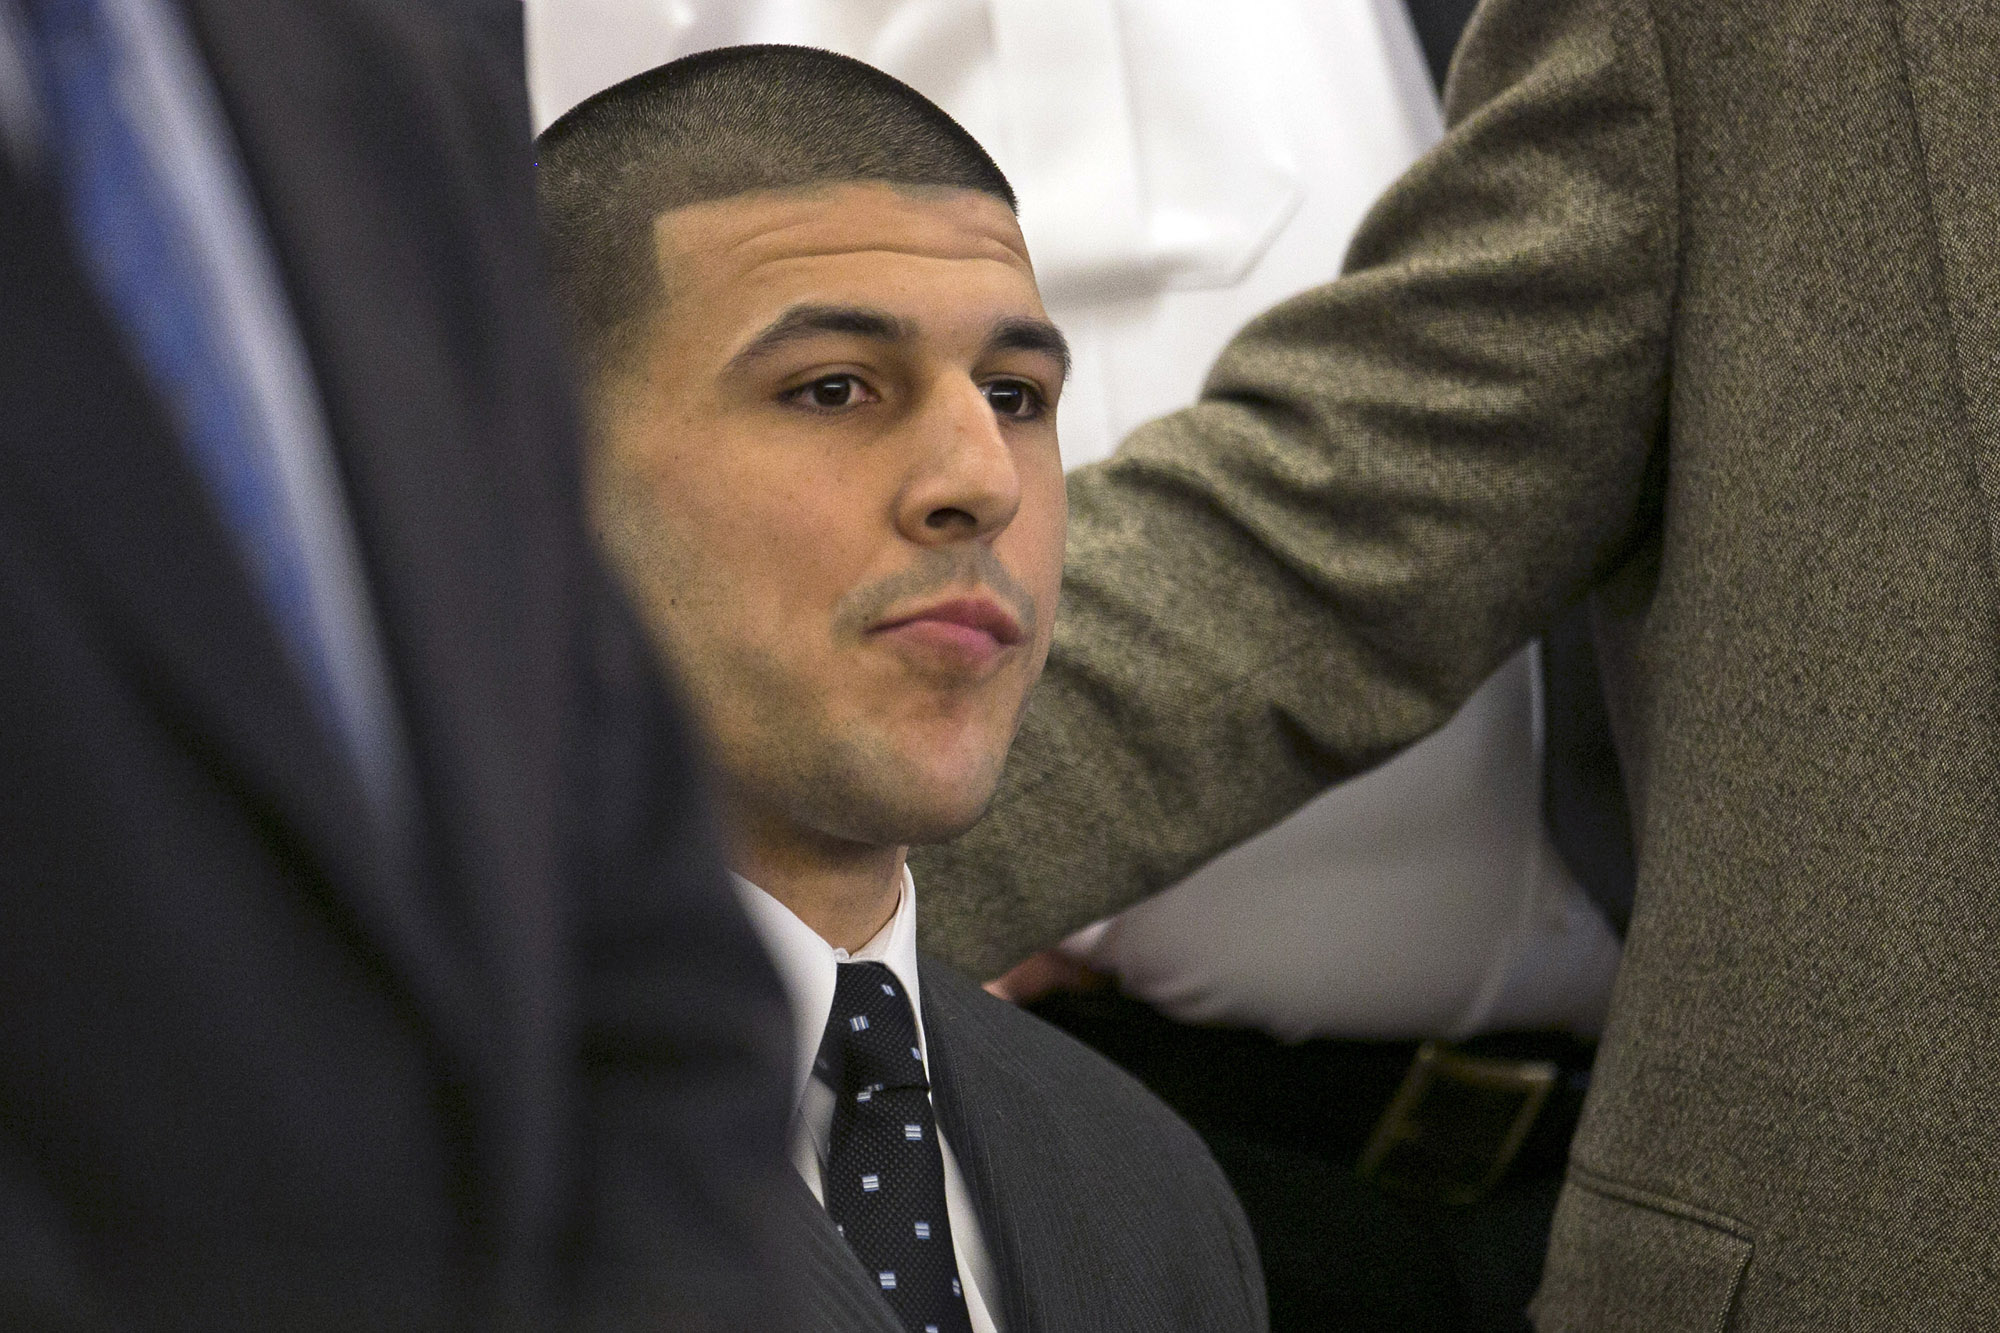 Former New England Patriots football player Aaron Hernandez listens as the guilty verdict is read during his murder trial on April 15. Photo: AP